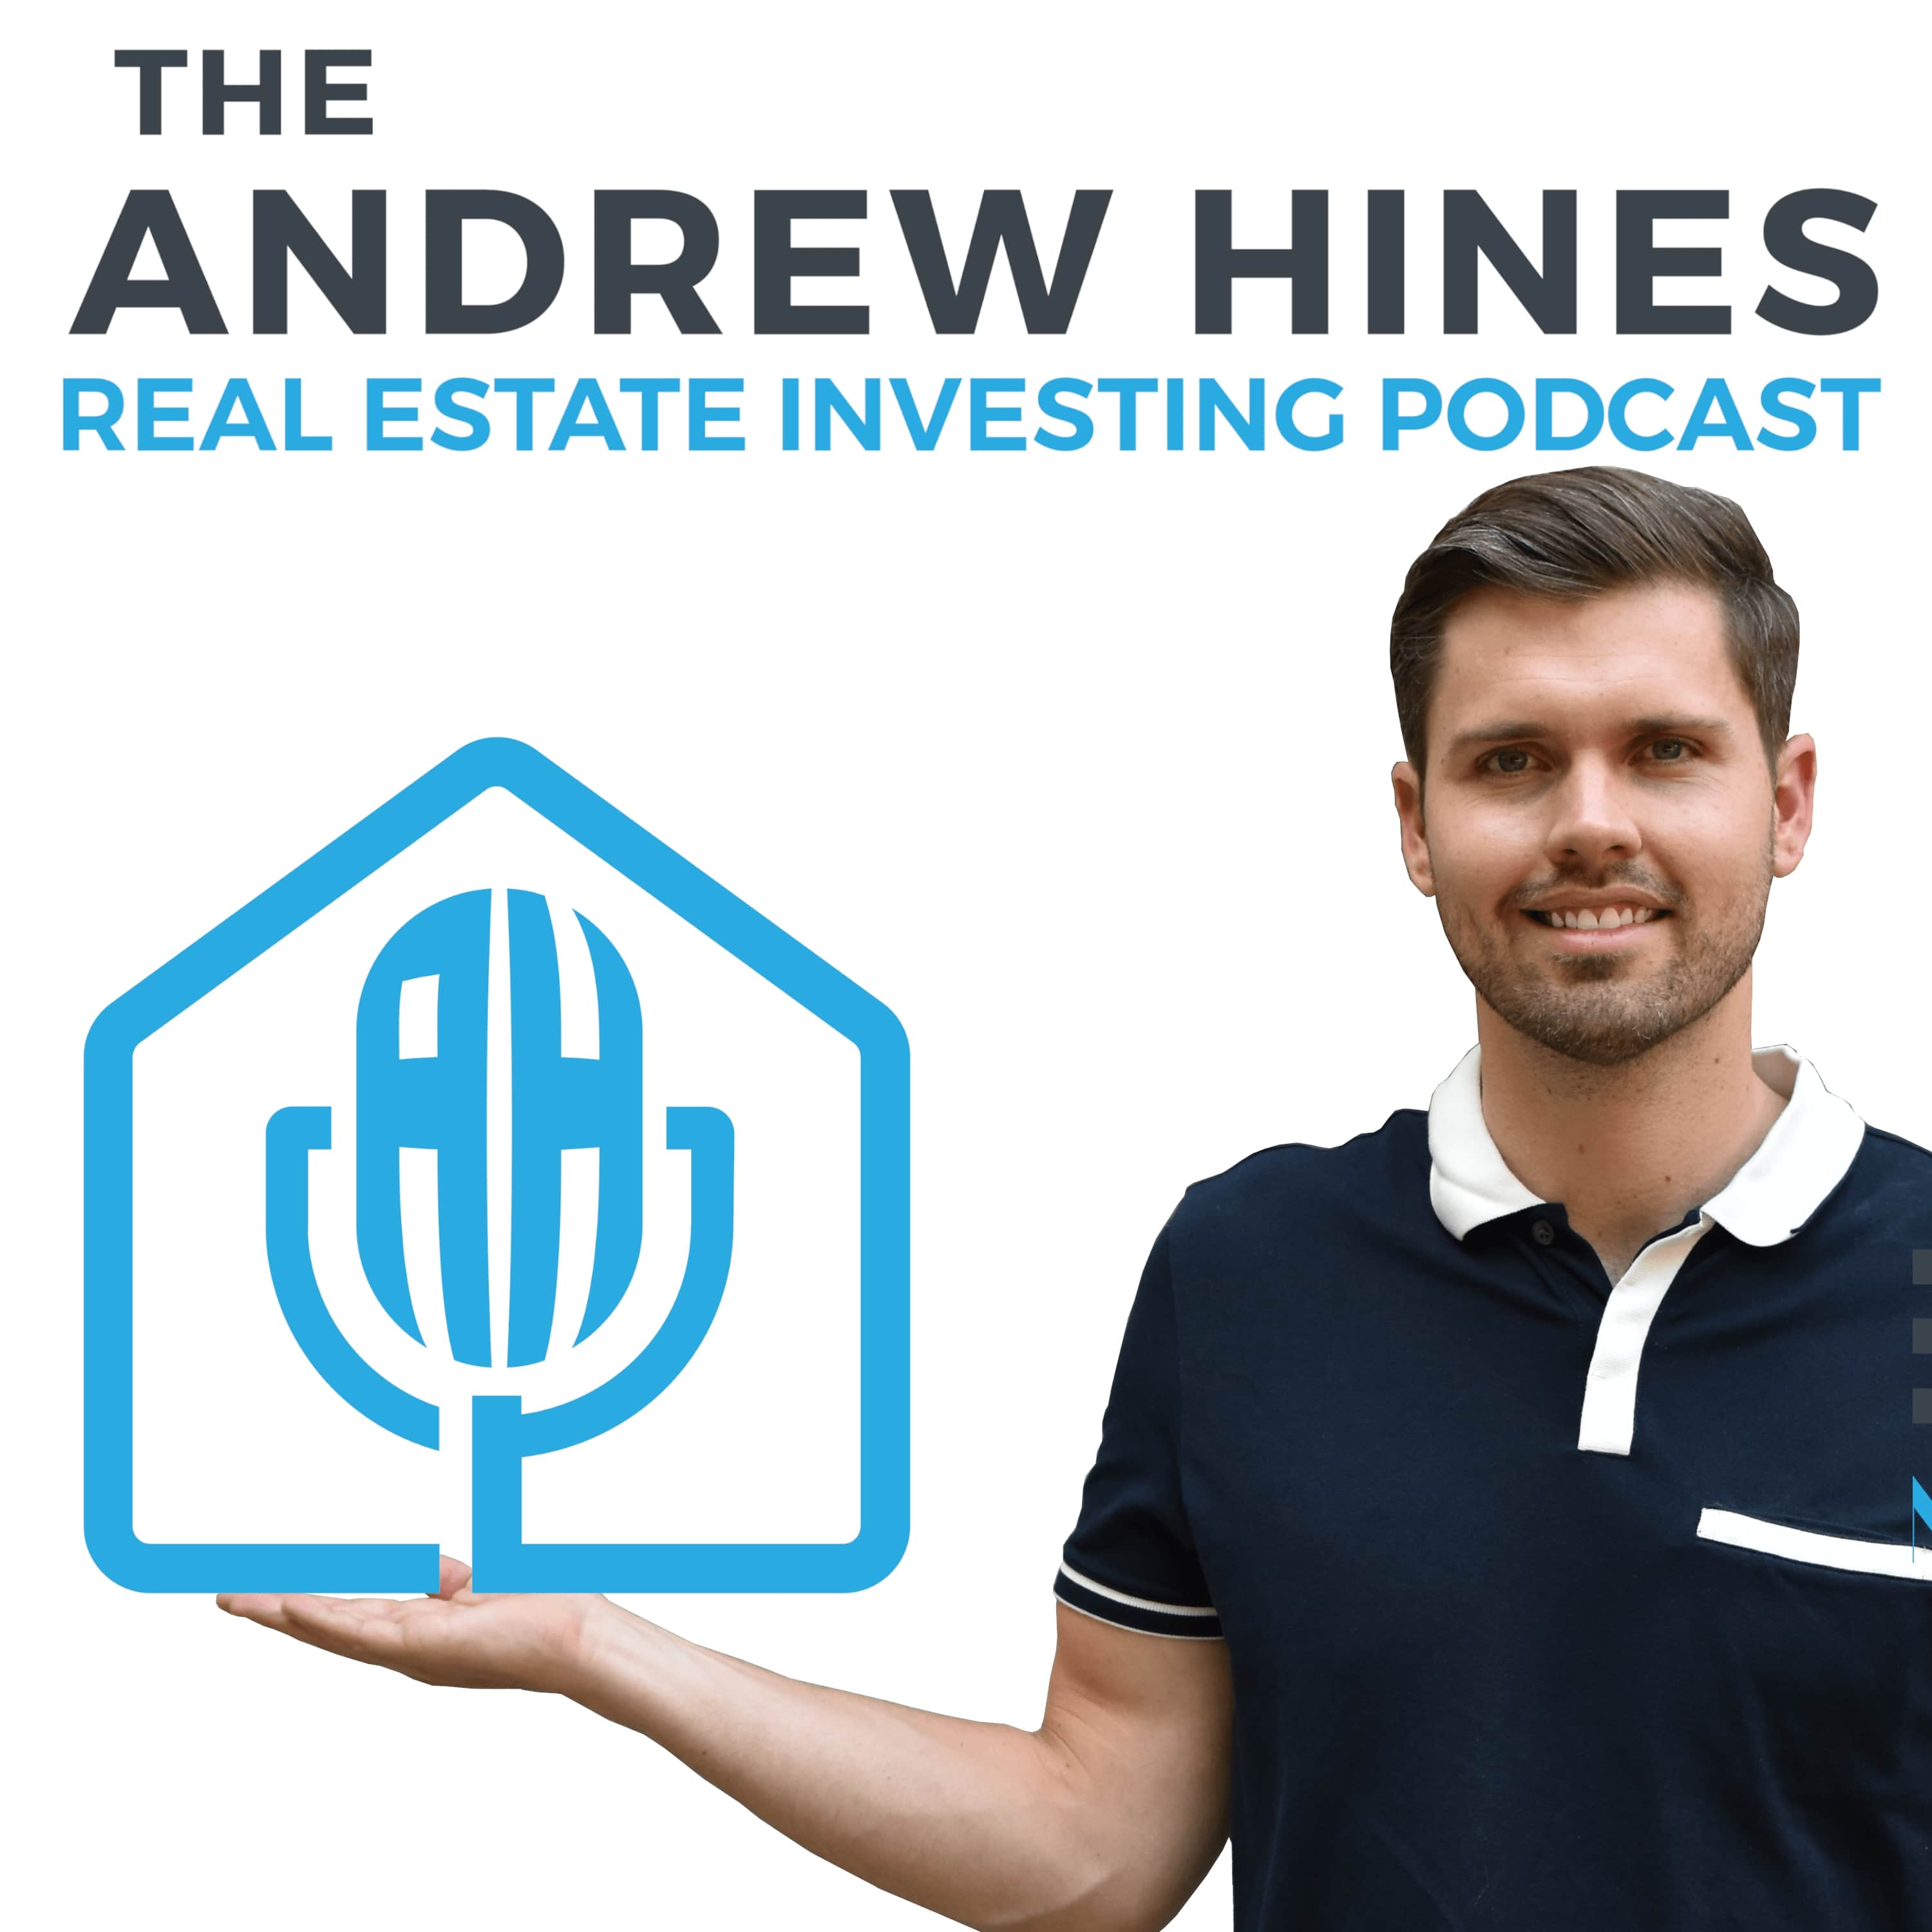 The Andrew Hines Real Estate Investing Podcast